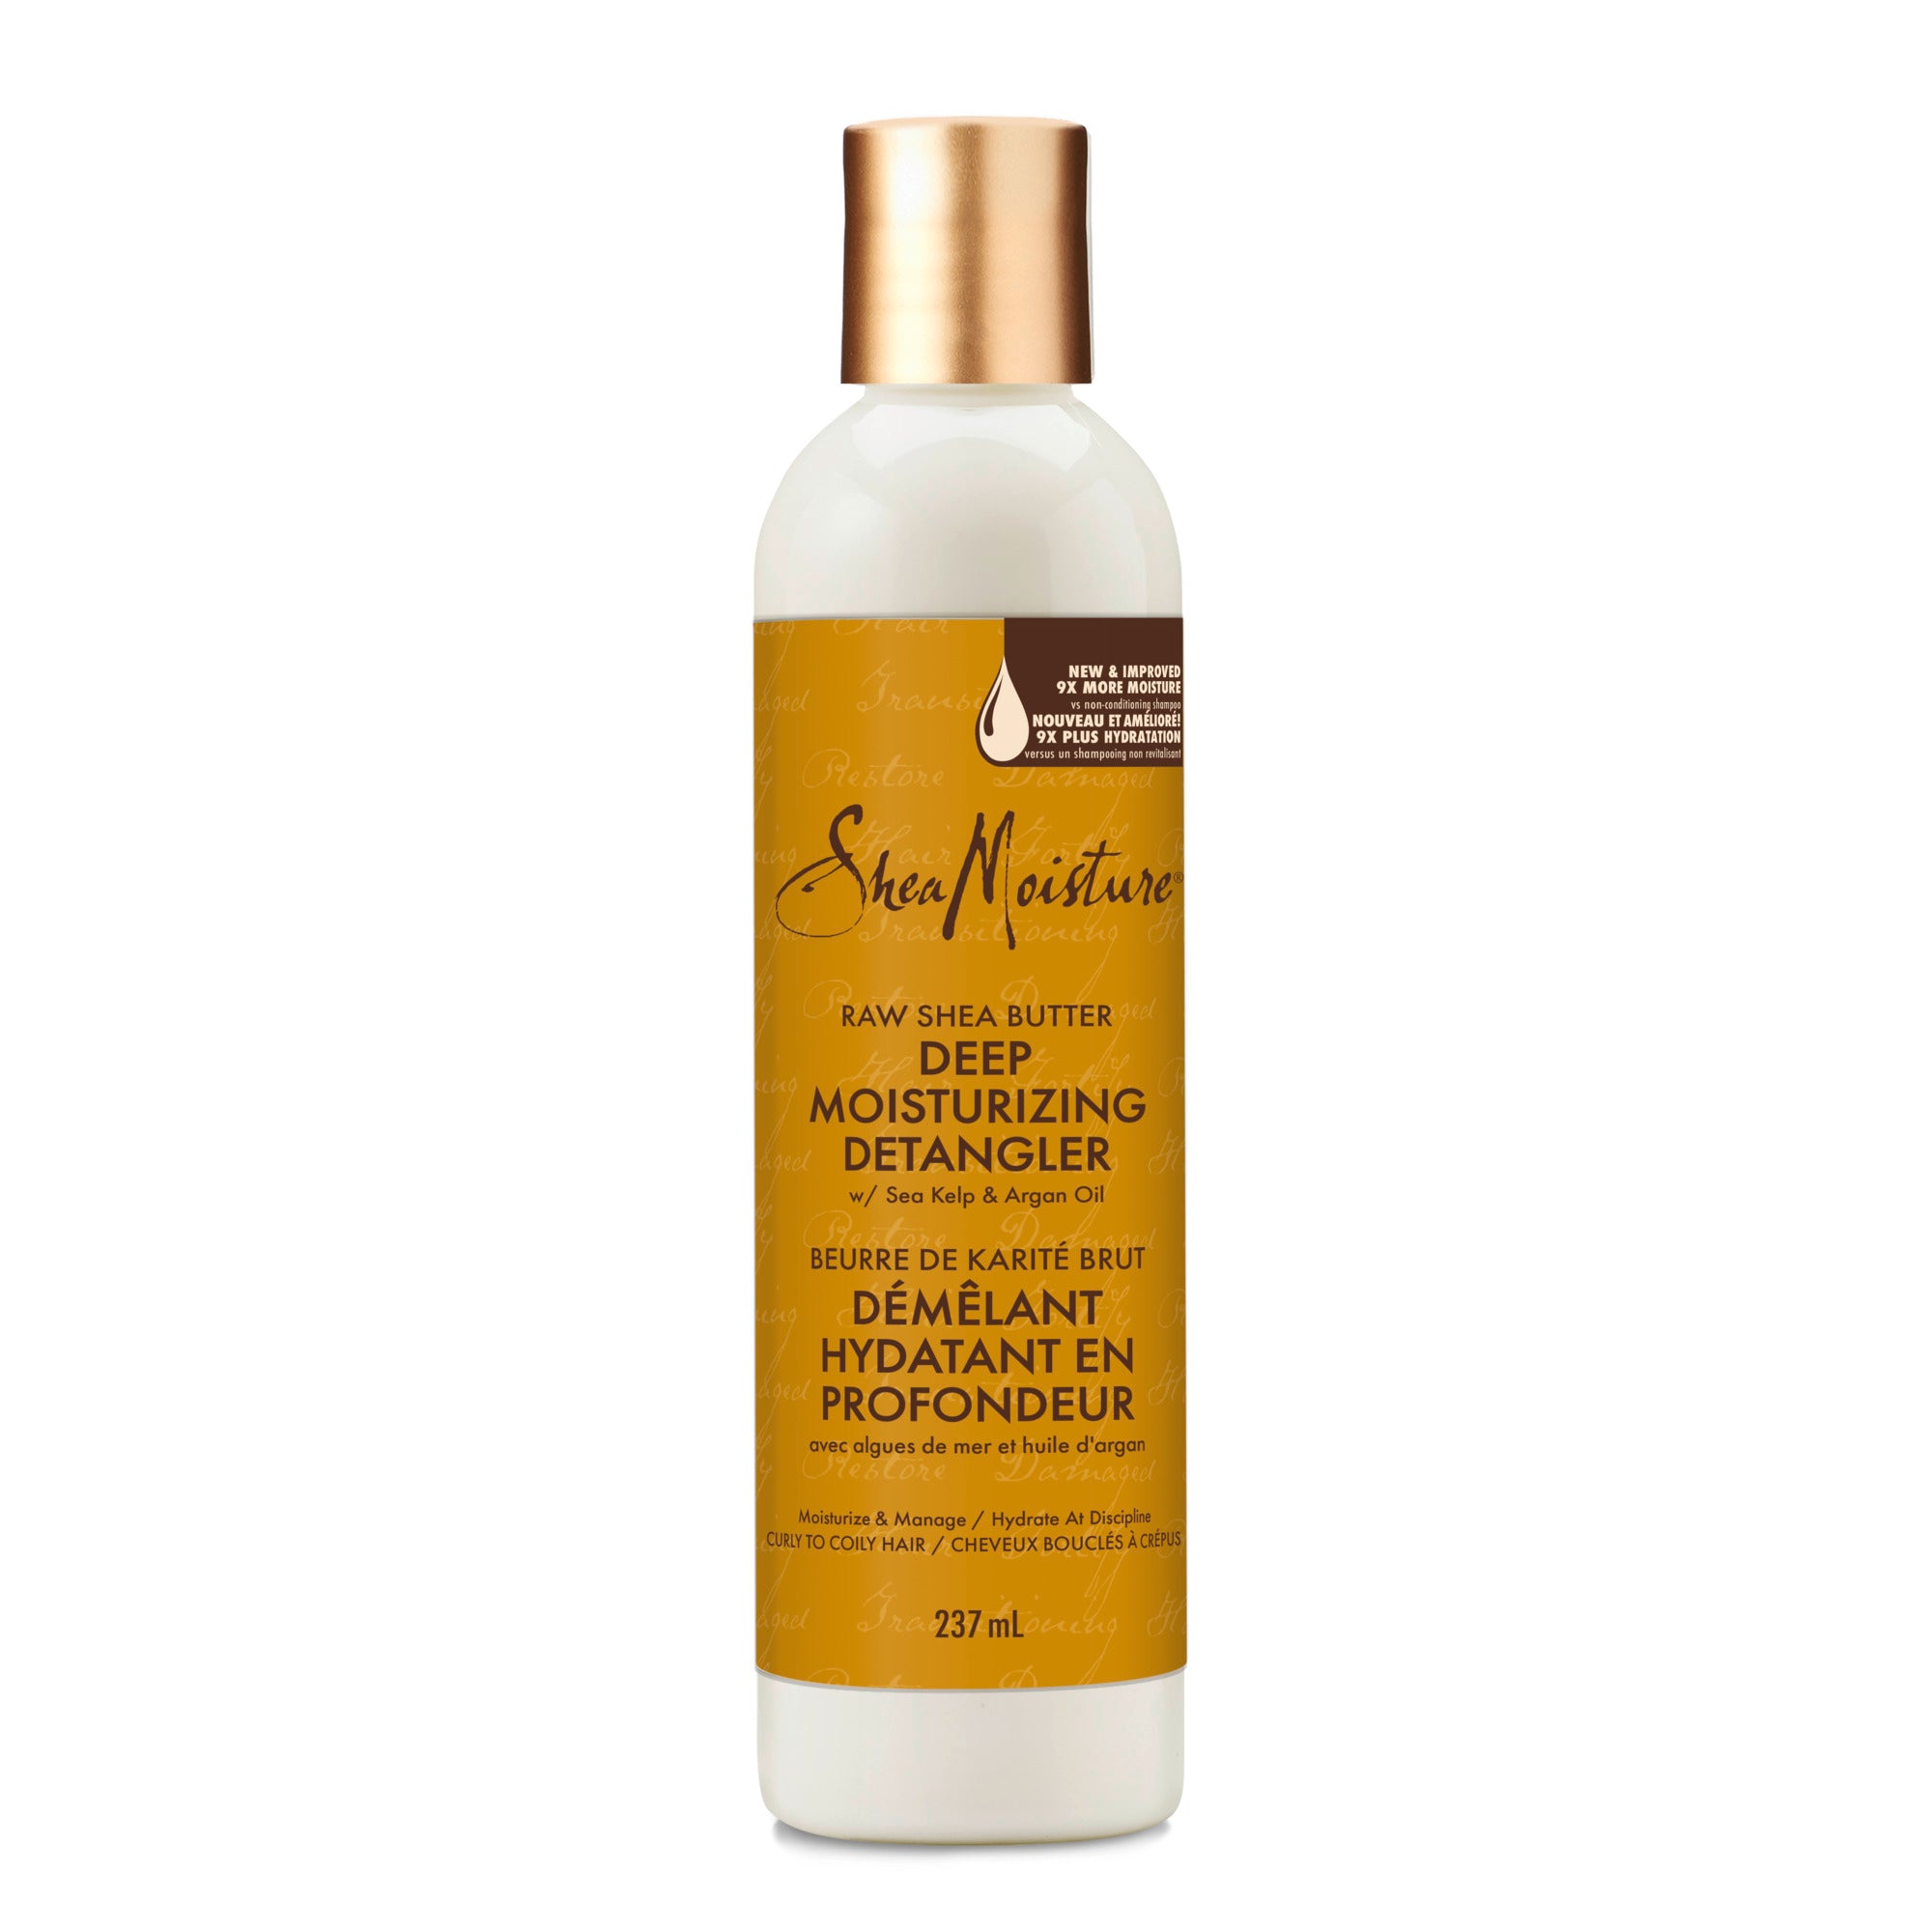 Showing the front angle view of the SheaMoisture Raw Shea Butter Extra Moisture Detangler 237mL product.